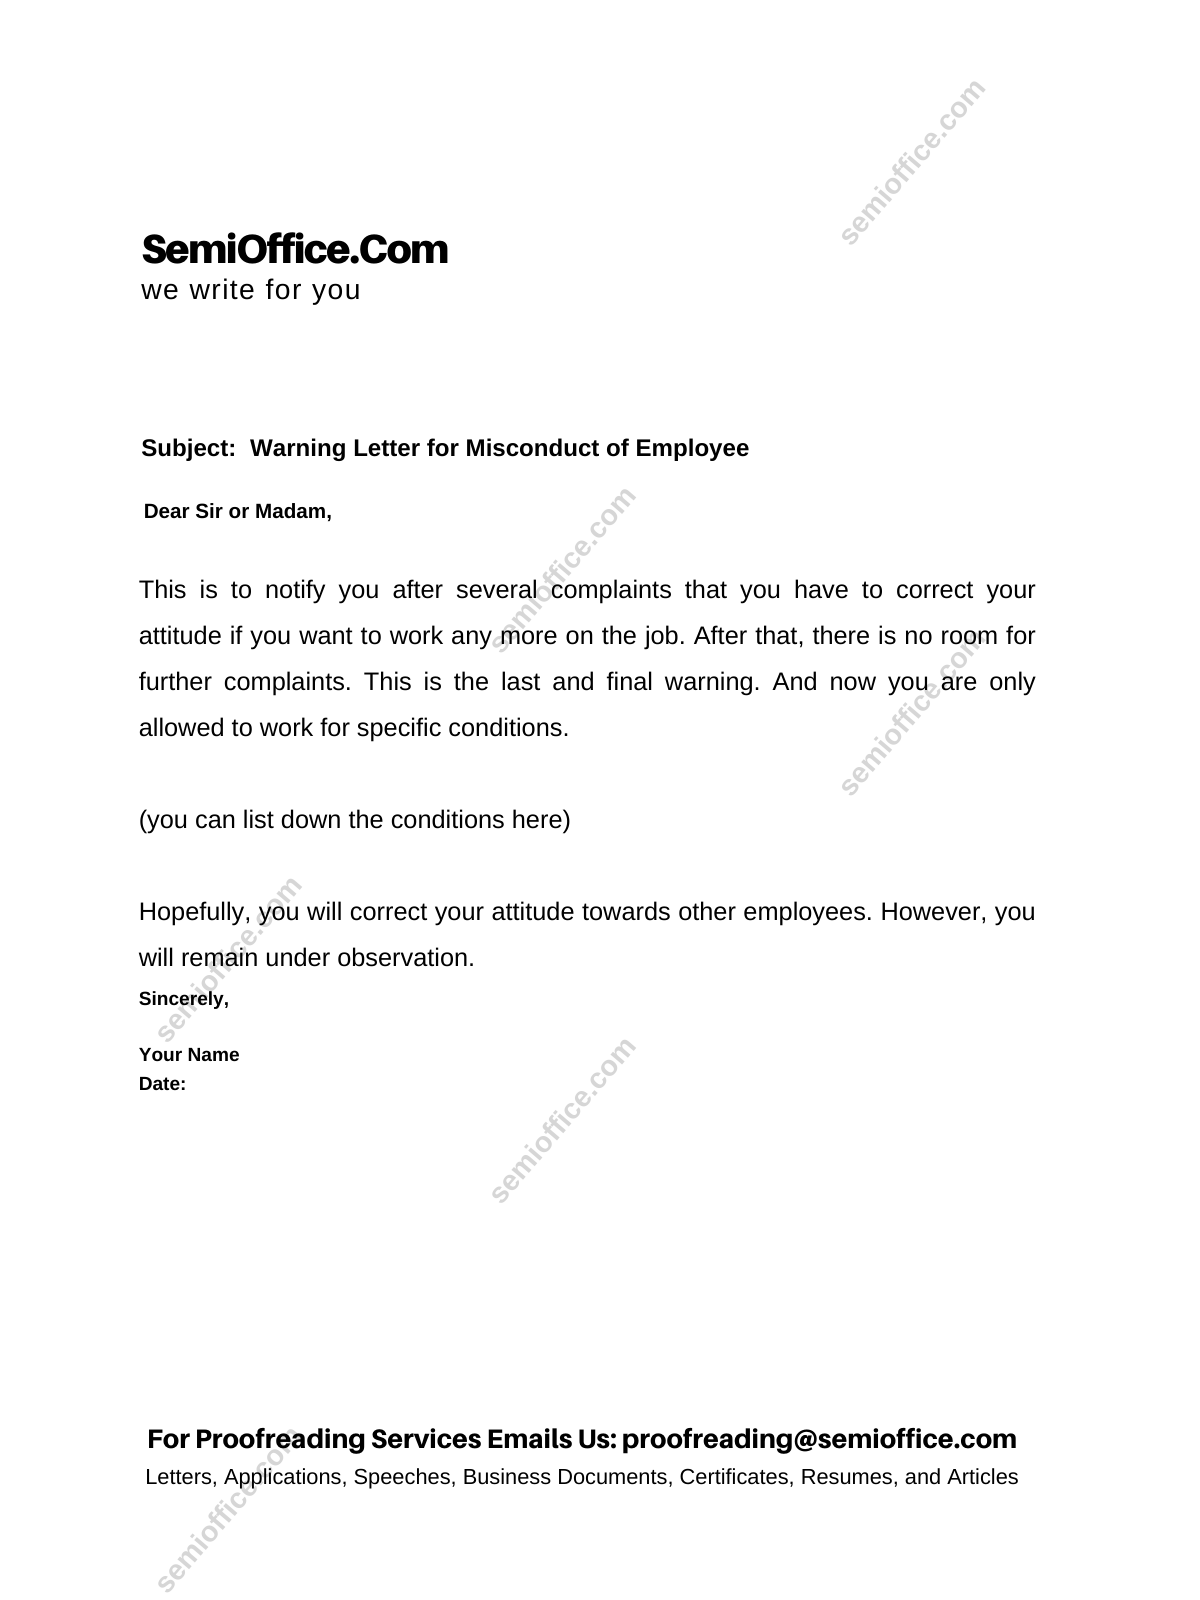 Final Warning Letter To Employee Sample